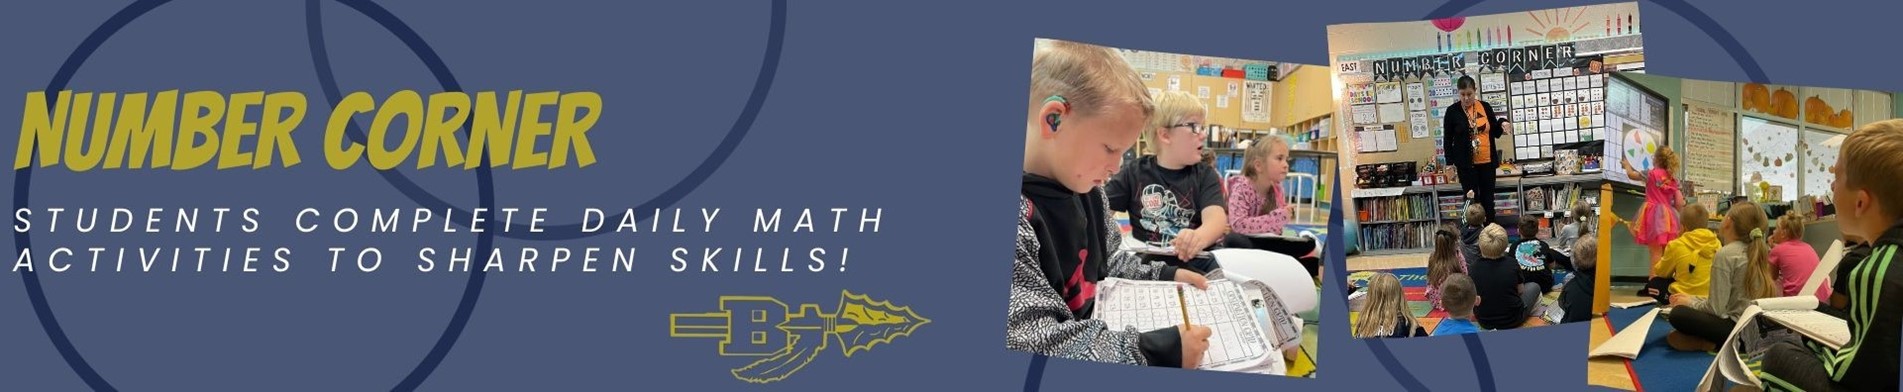 Students complete daily math activities to sharpen skills